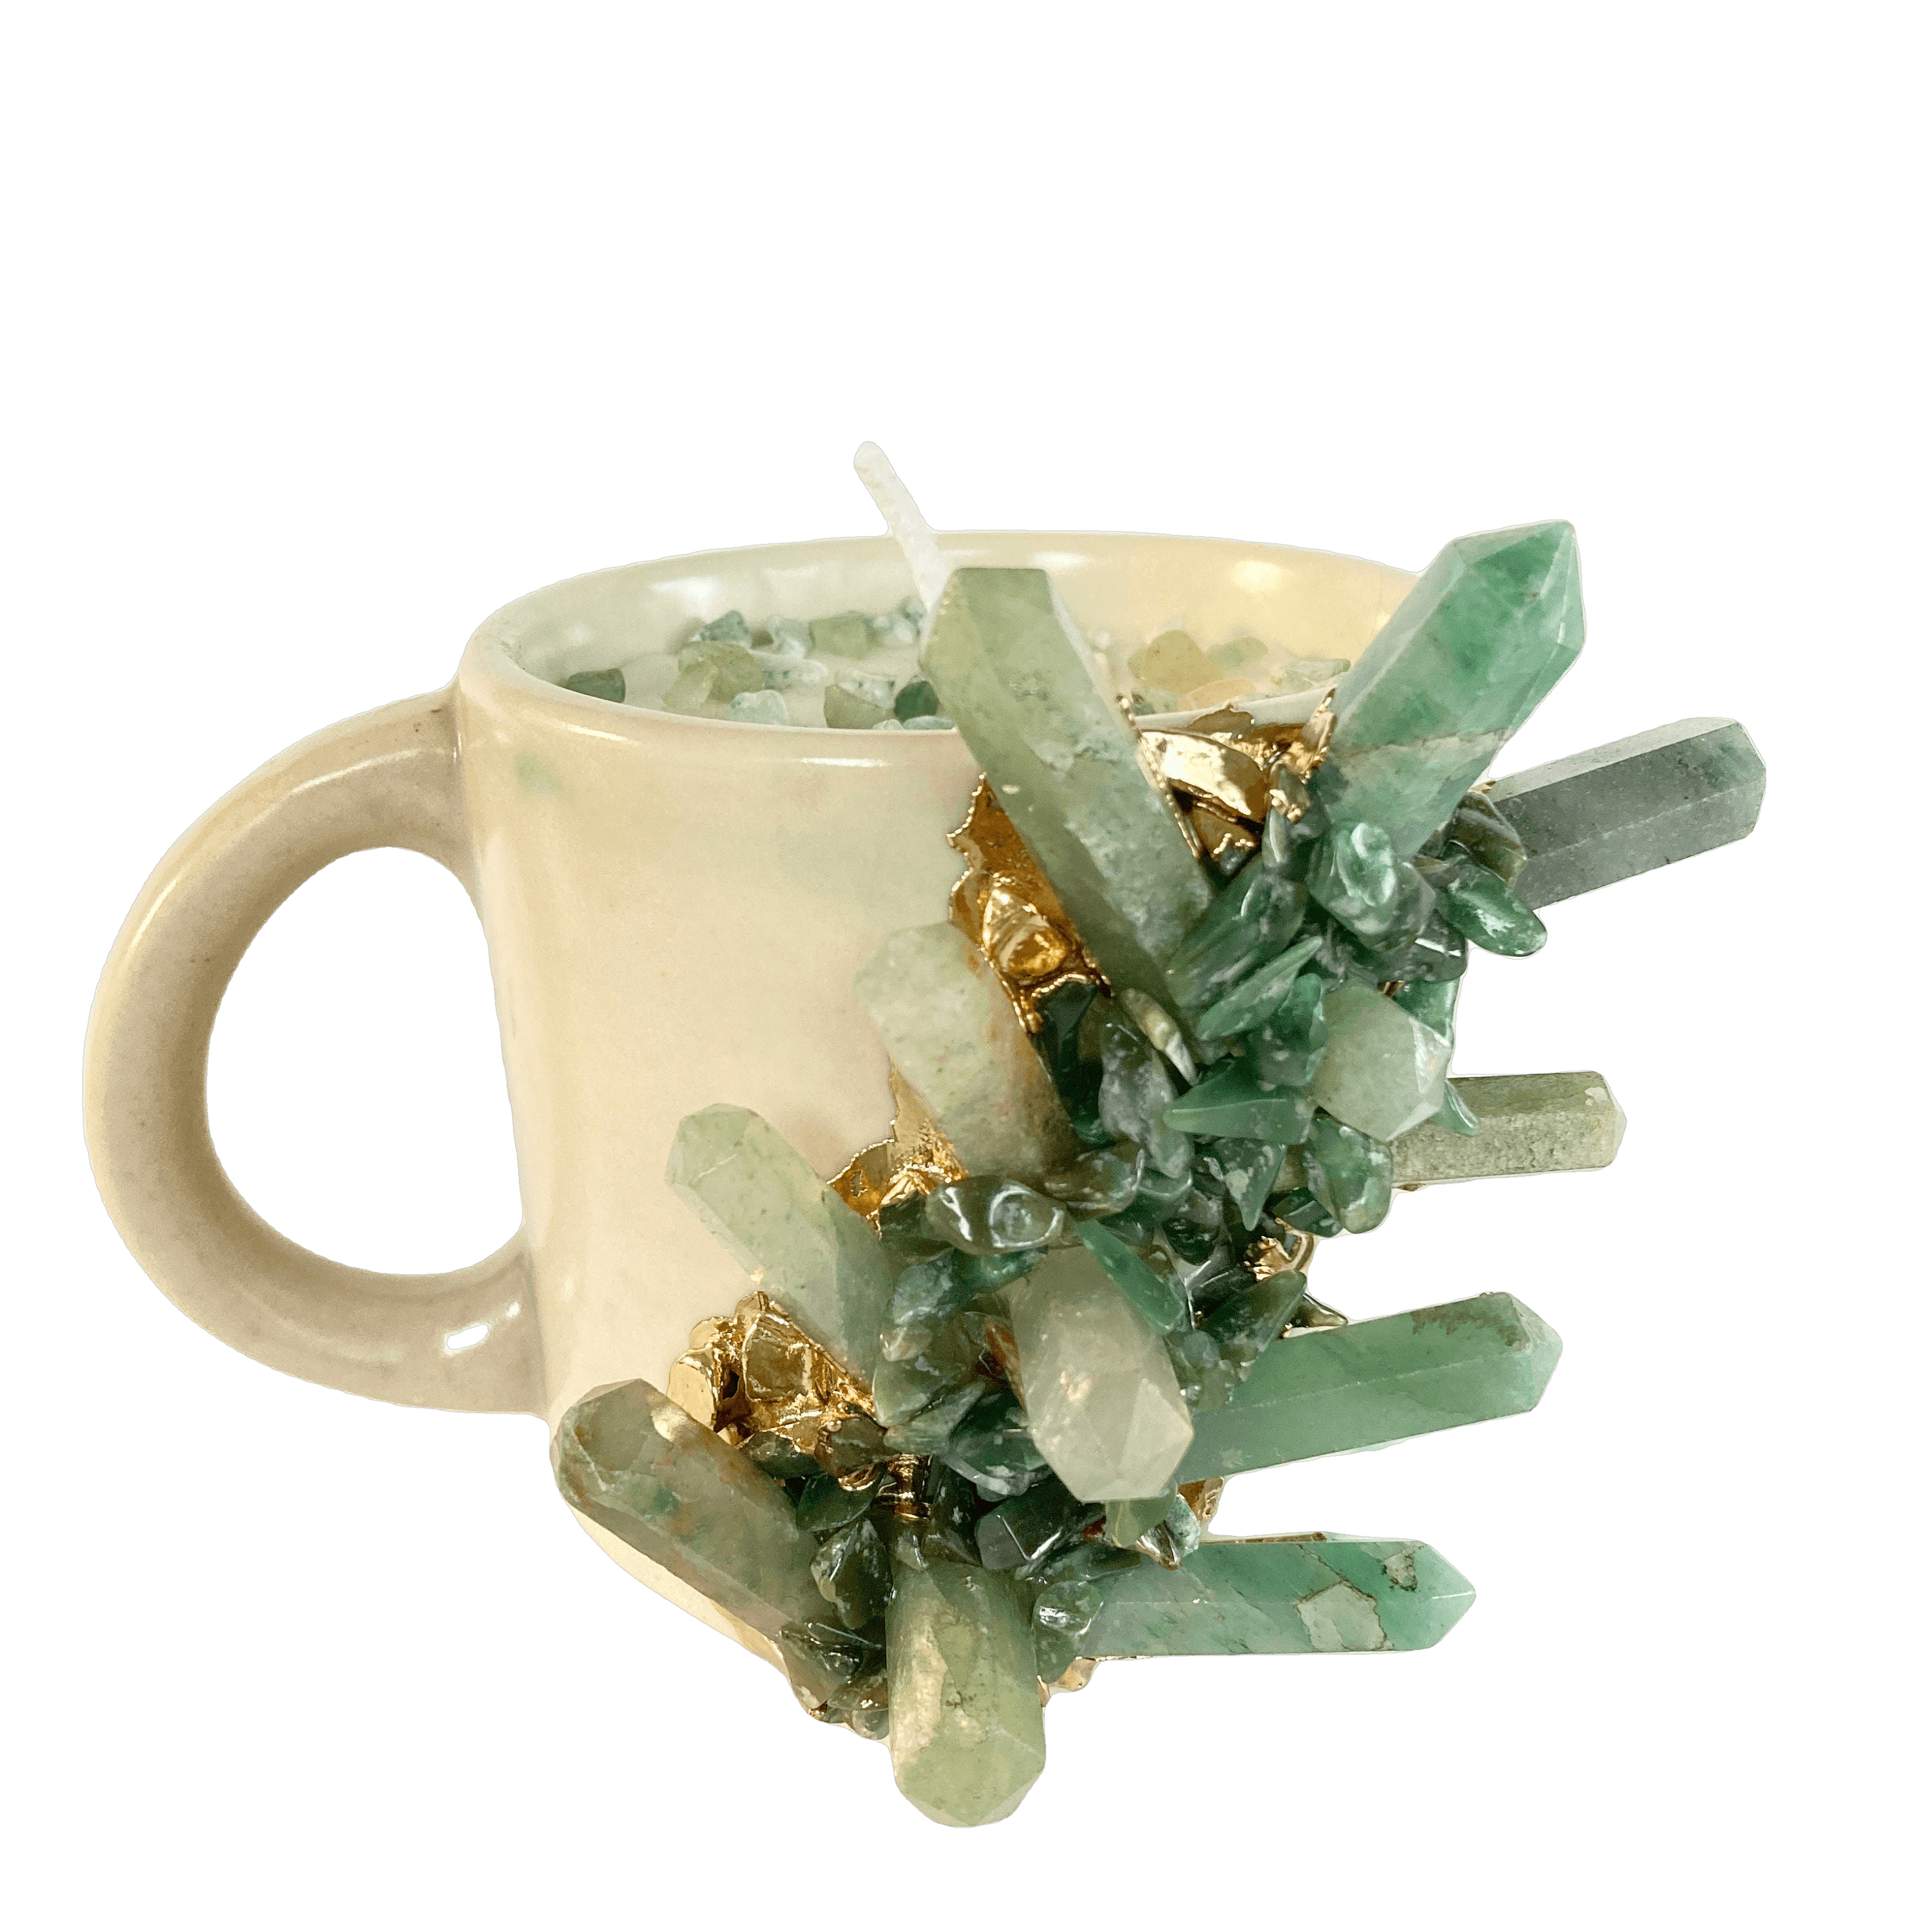 Green Quartz Crystal Scented Soy Candles in Coffee Mug - Set of 2